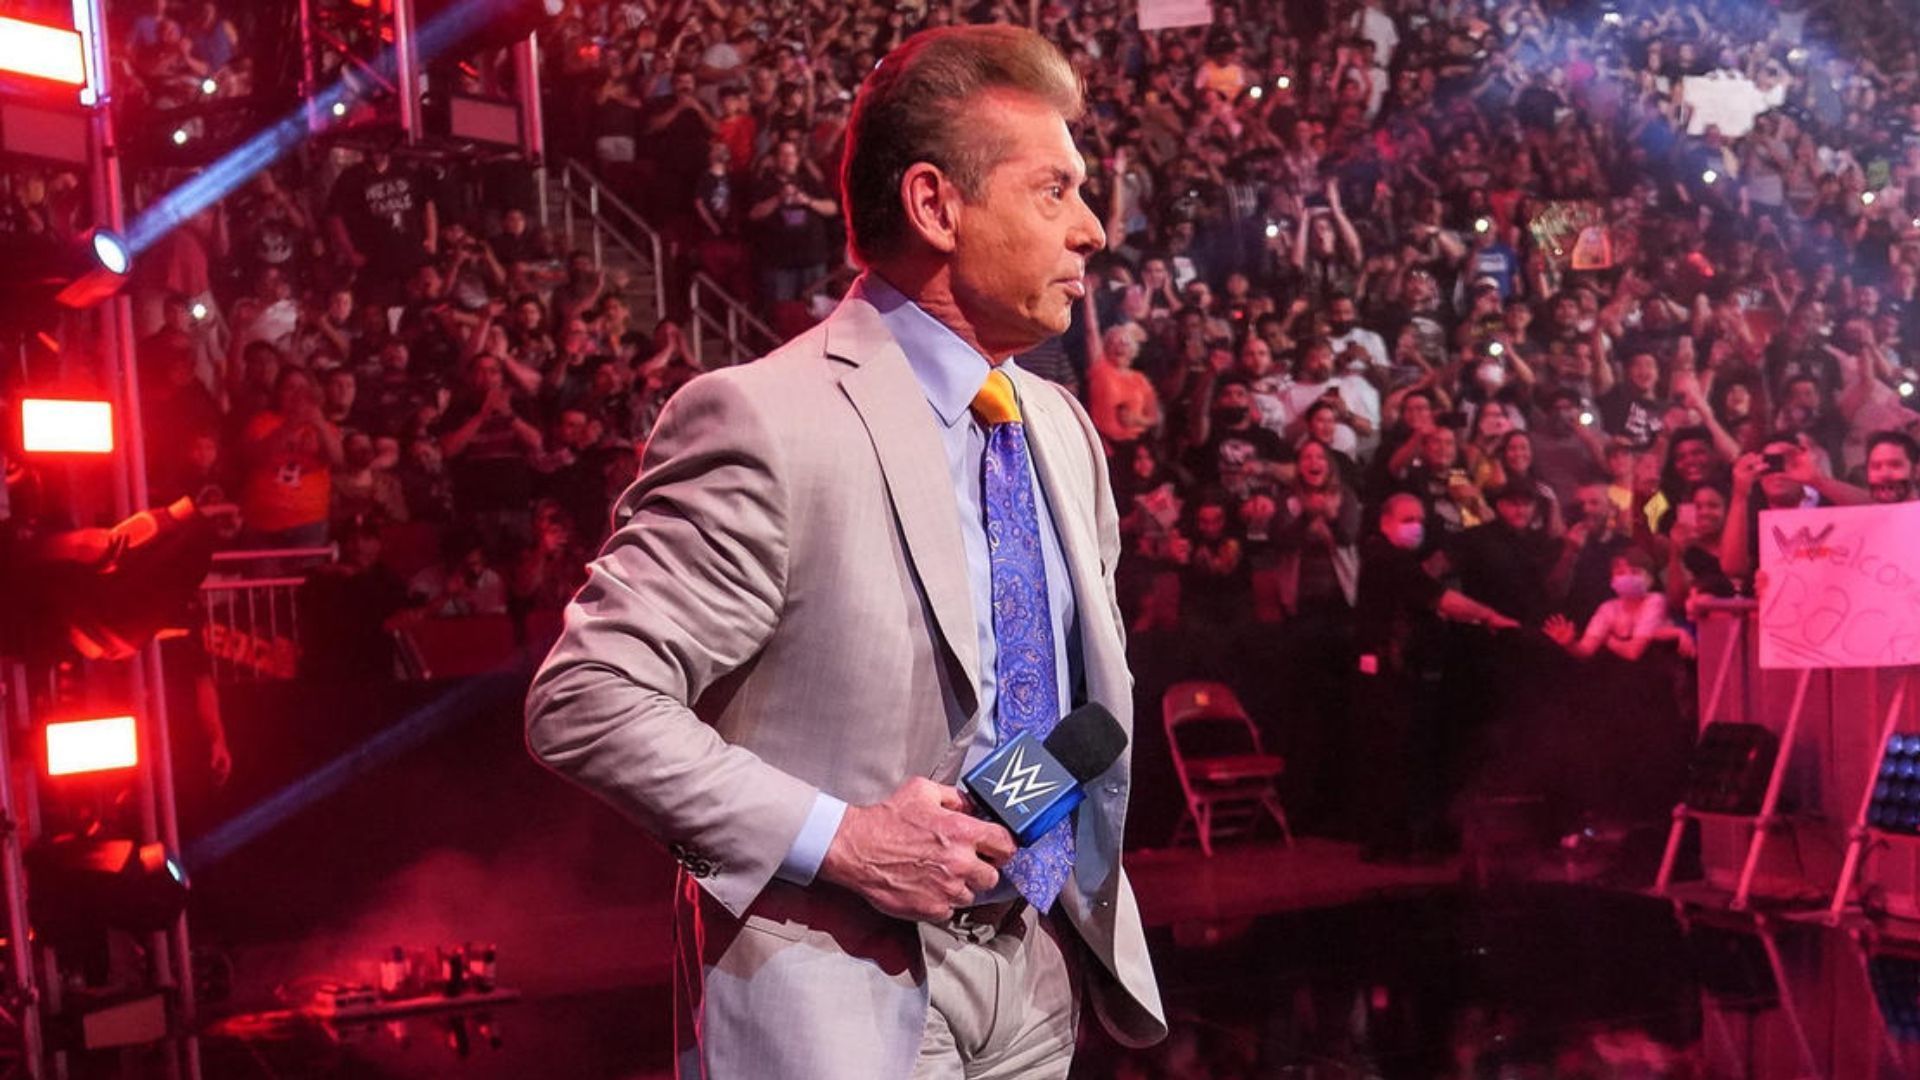 Vince McMahon appearing on WWE television